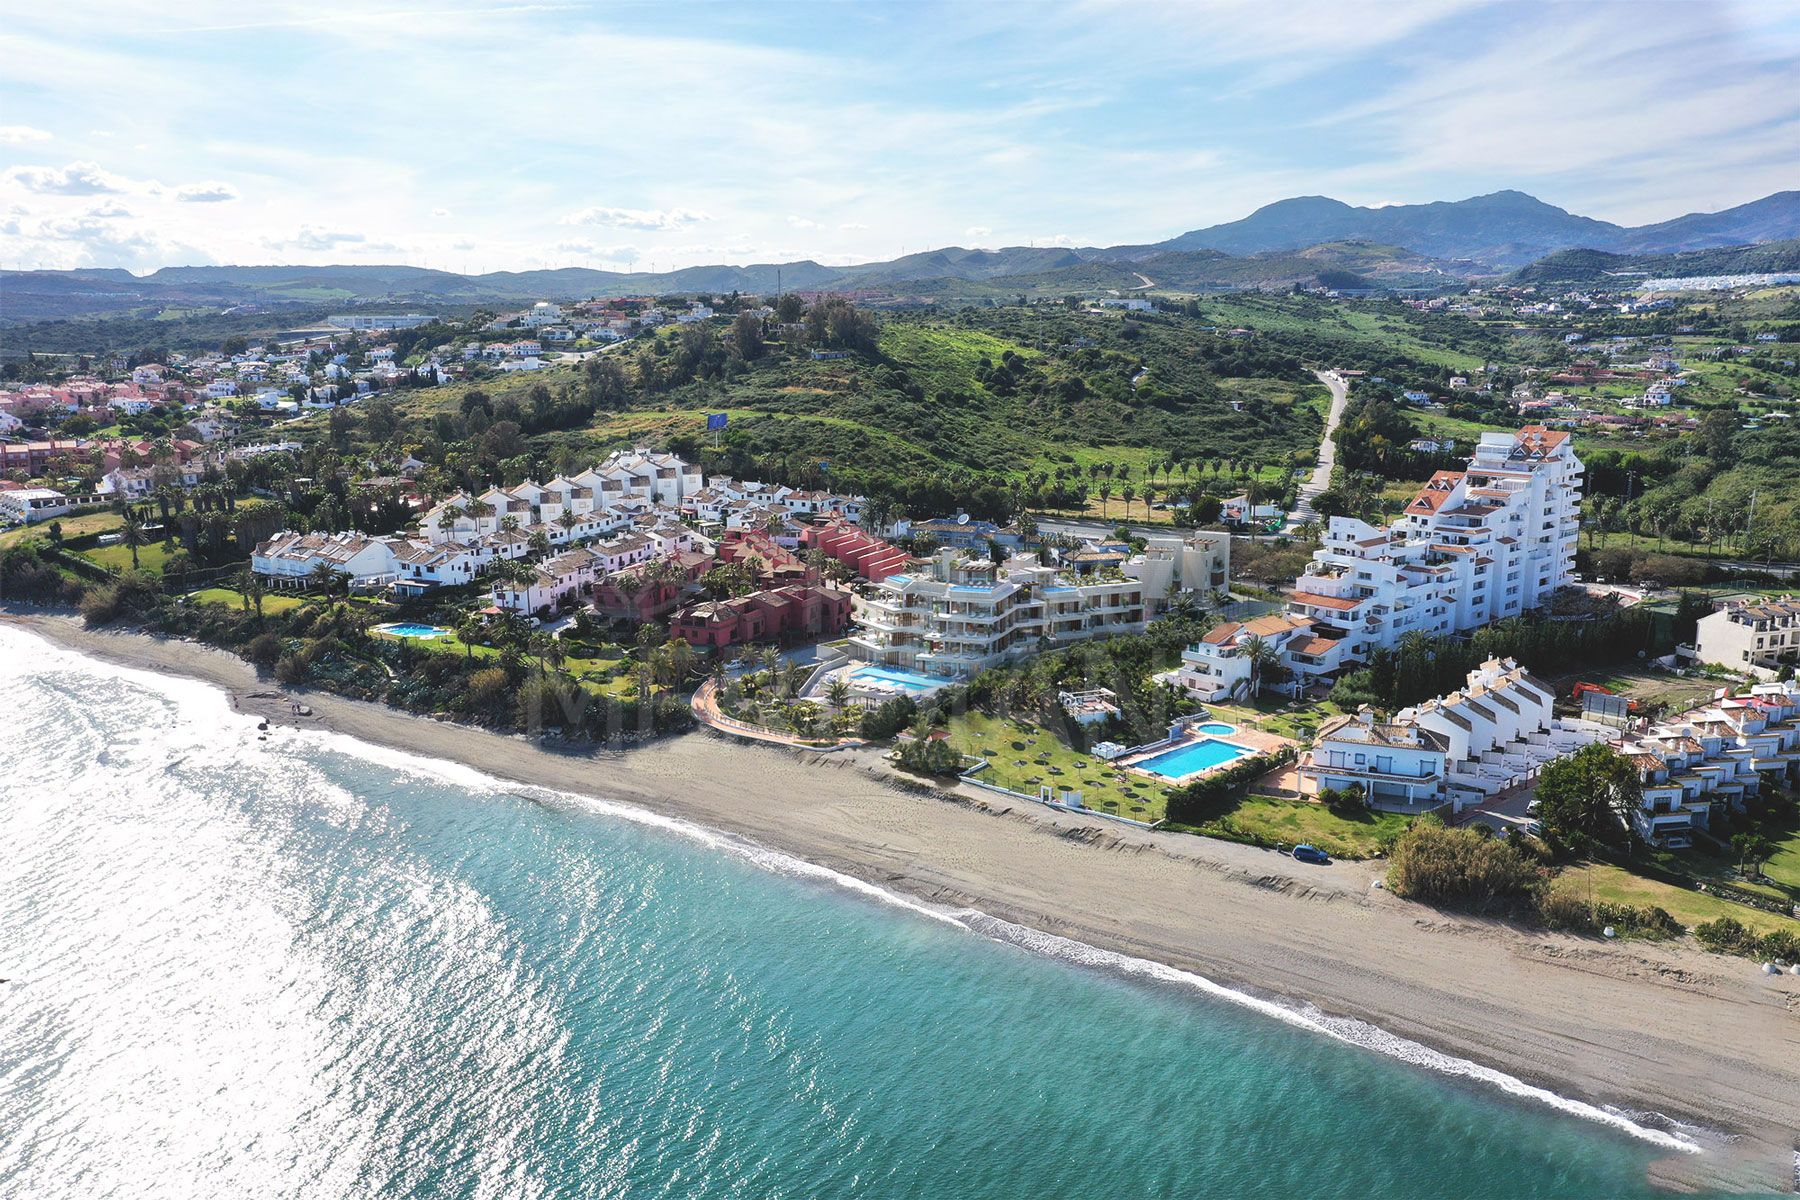 Off plan luxury apartment with 2 bedrooms and sea views for sale in Guadalobón Beach, Estepona